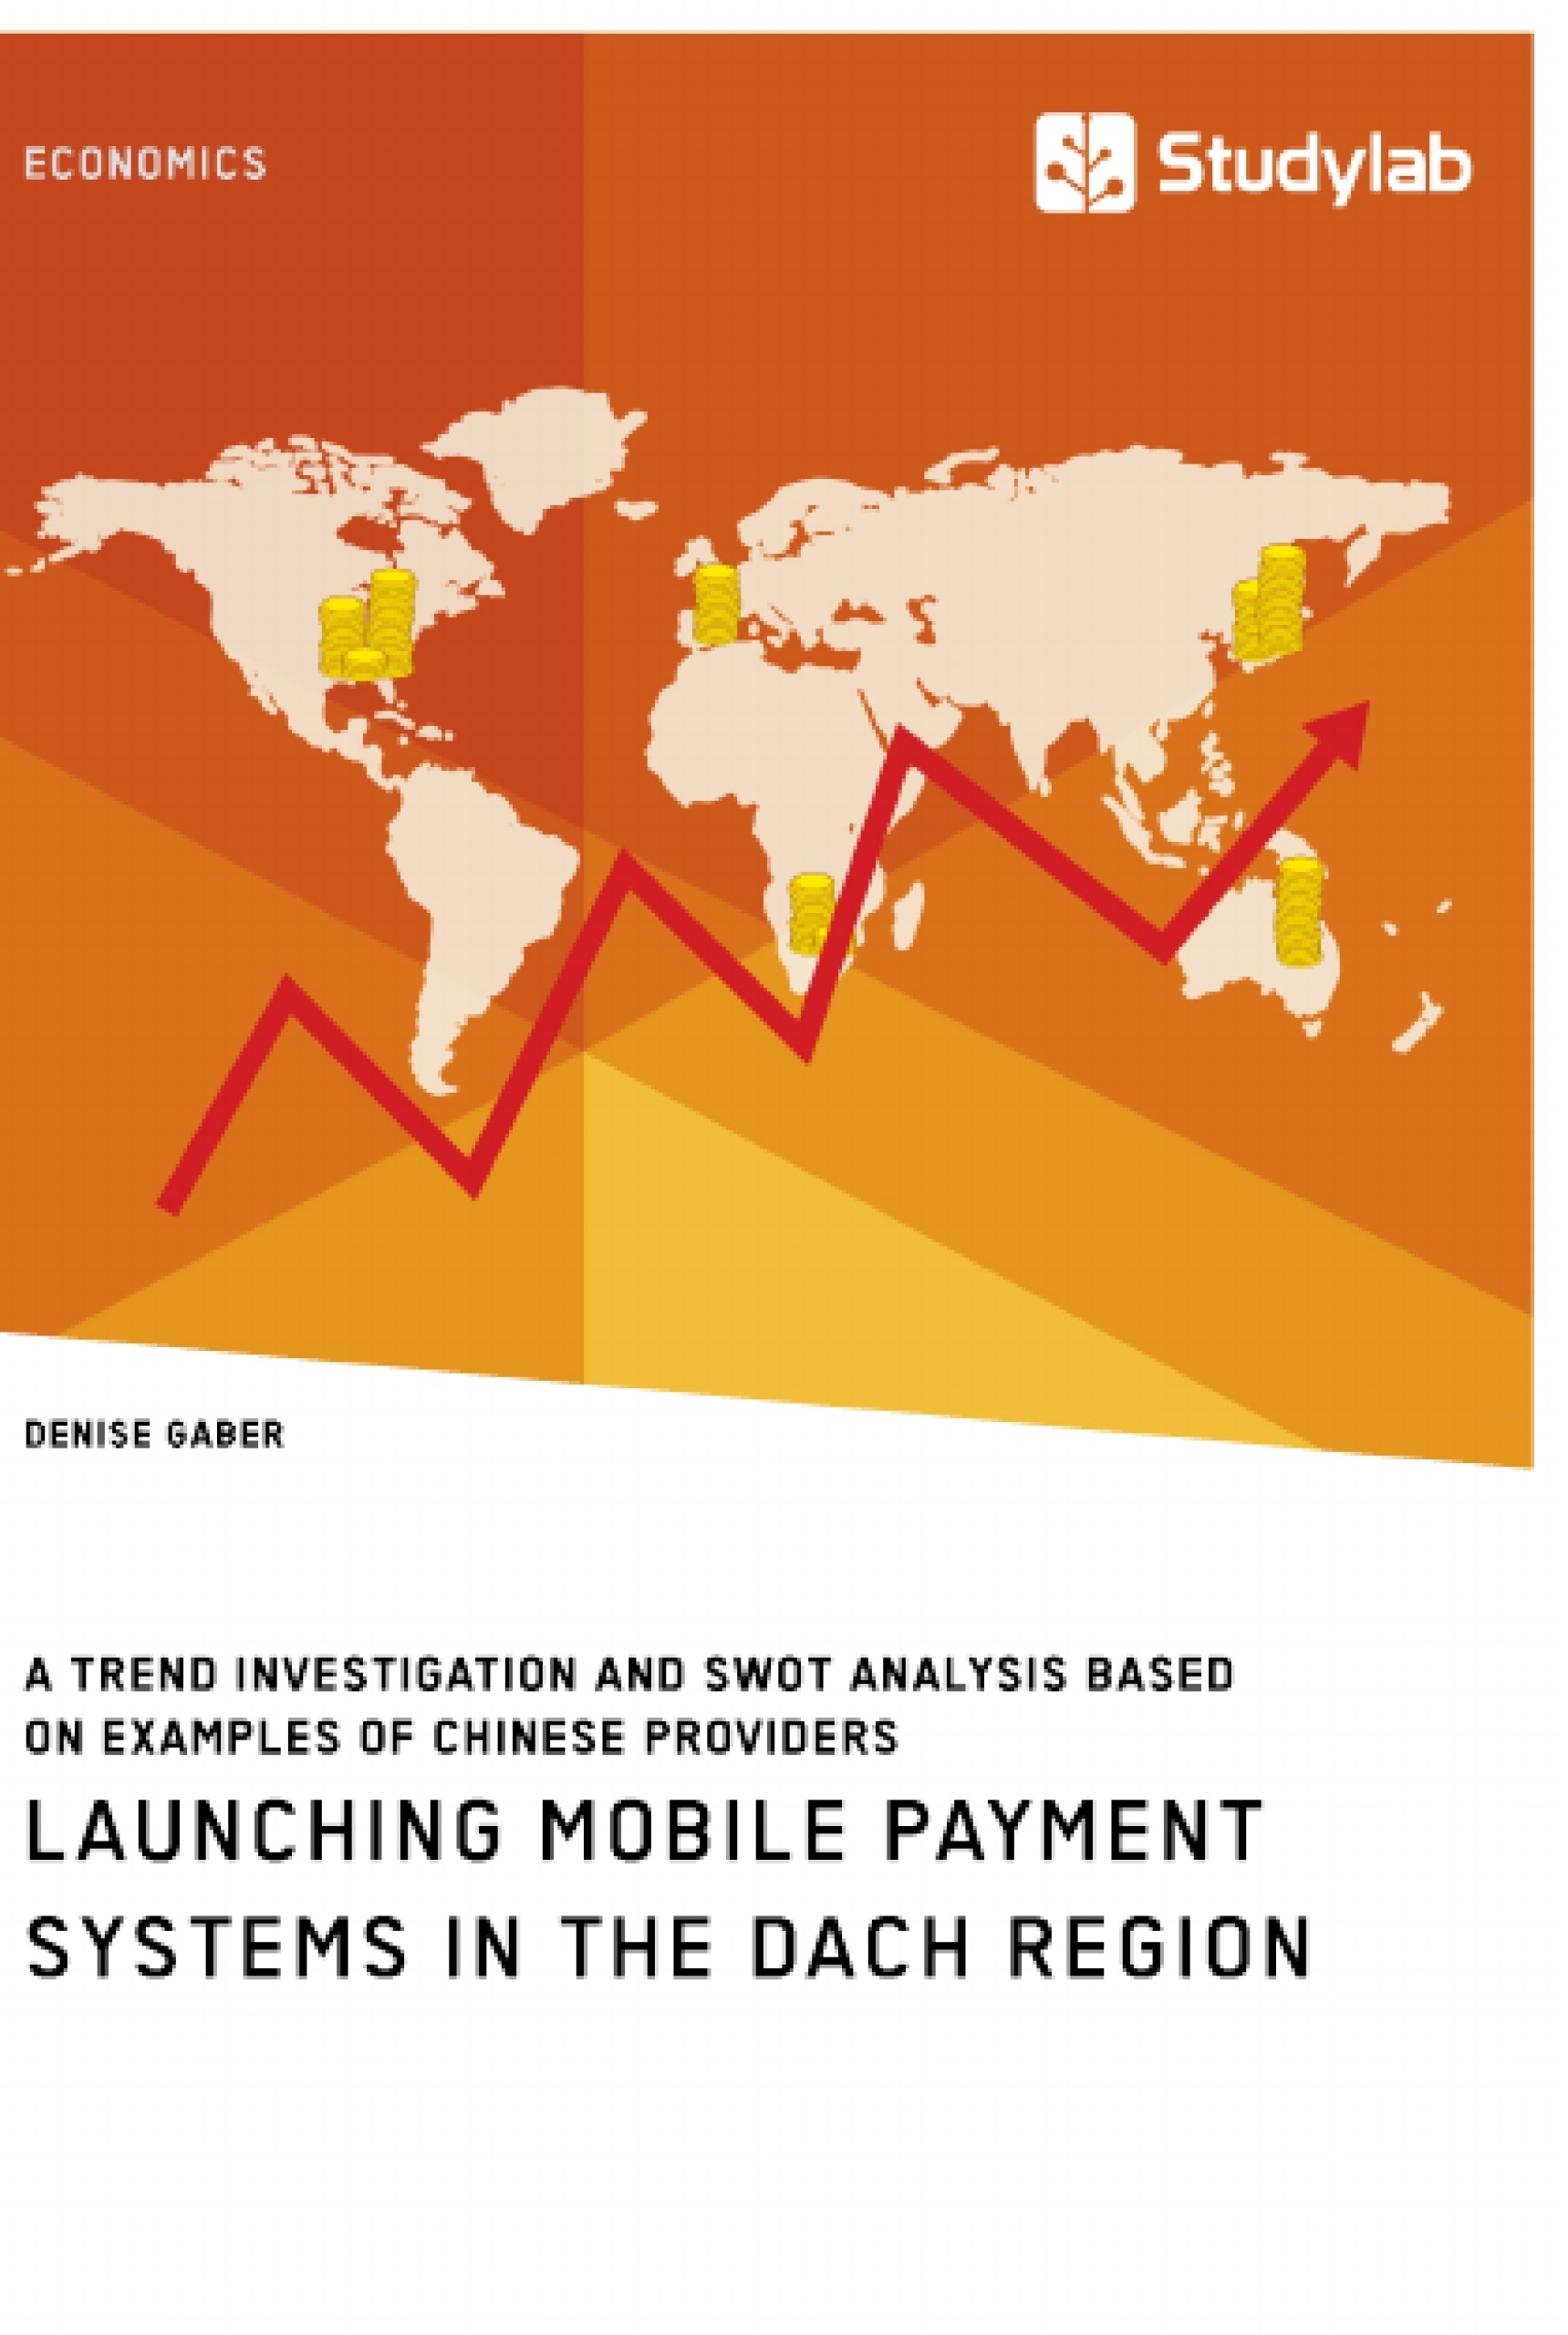 Title: Launching mobile payment systems in the DACH region. A trend investigation and SWOT analysis based on examples of Chinese providers